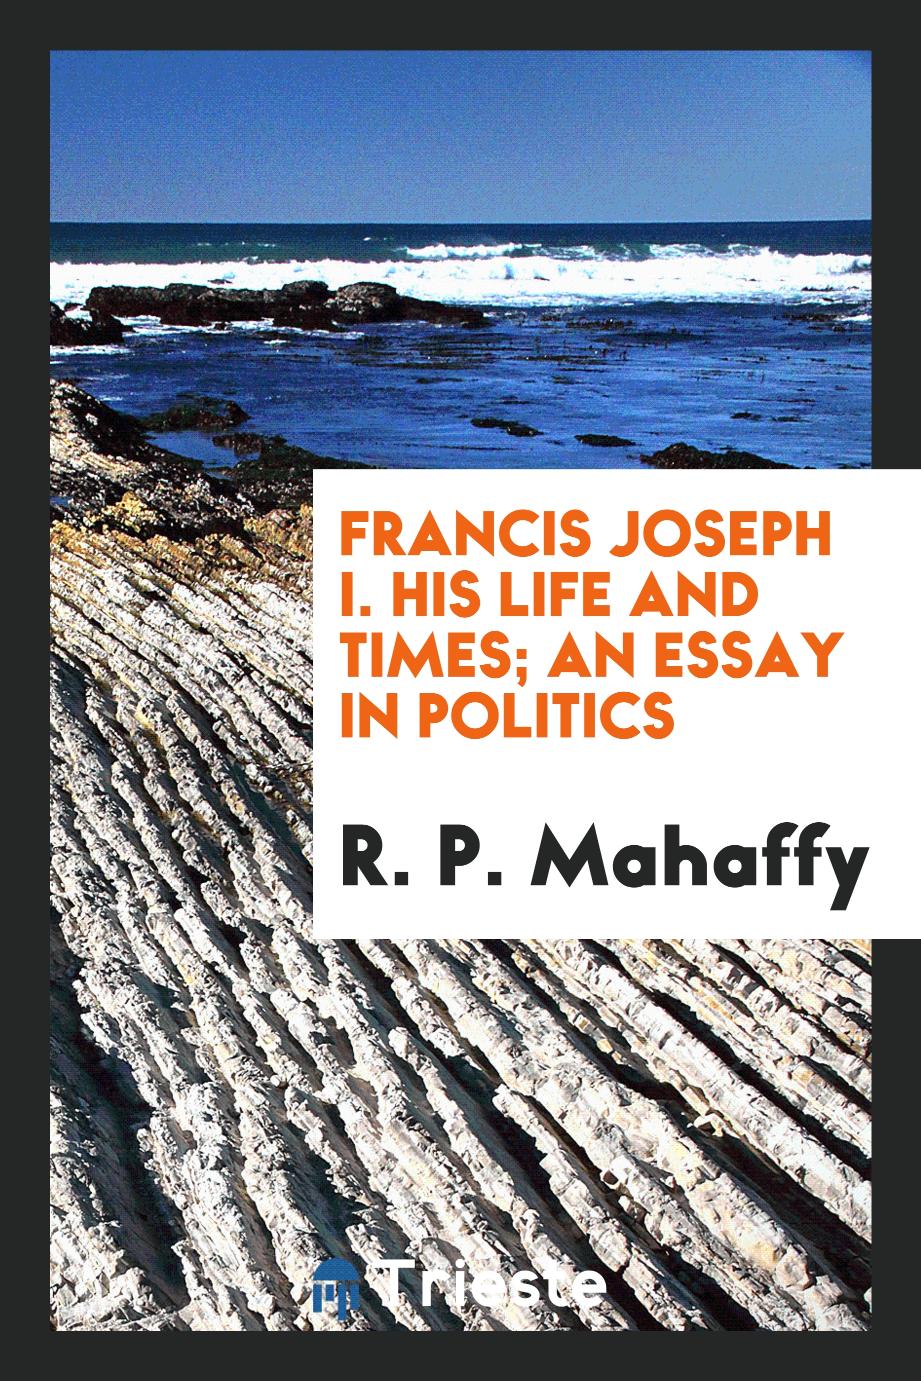 Francis Joseph I. His life and times; an essay in politics